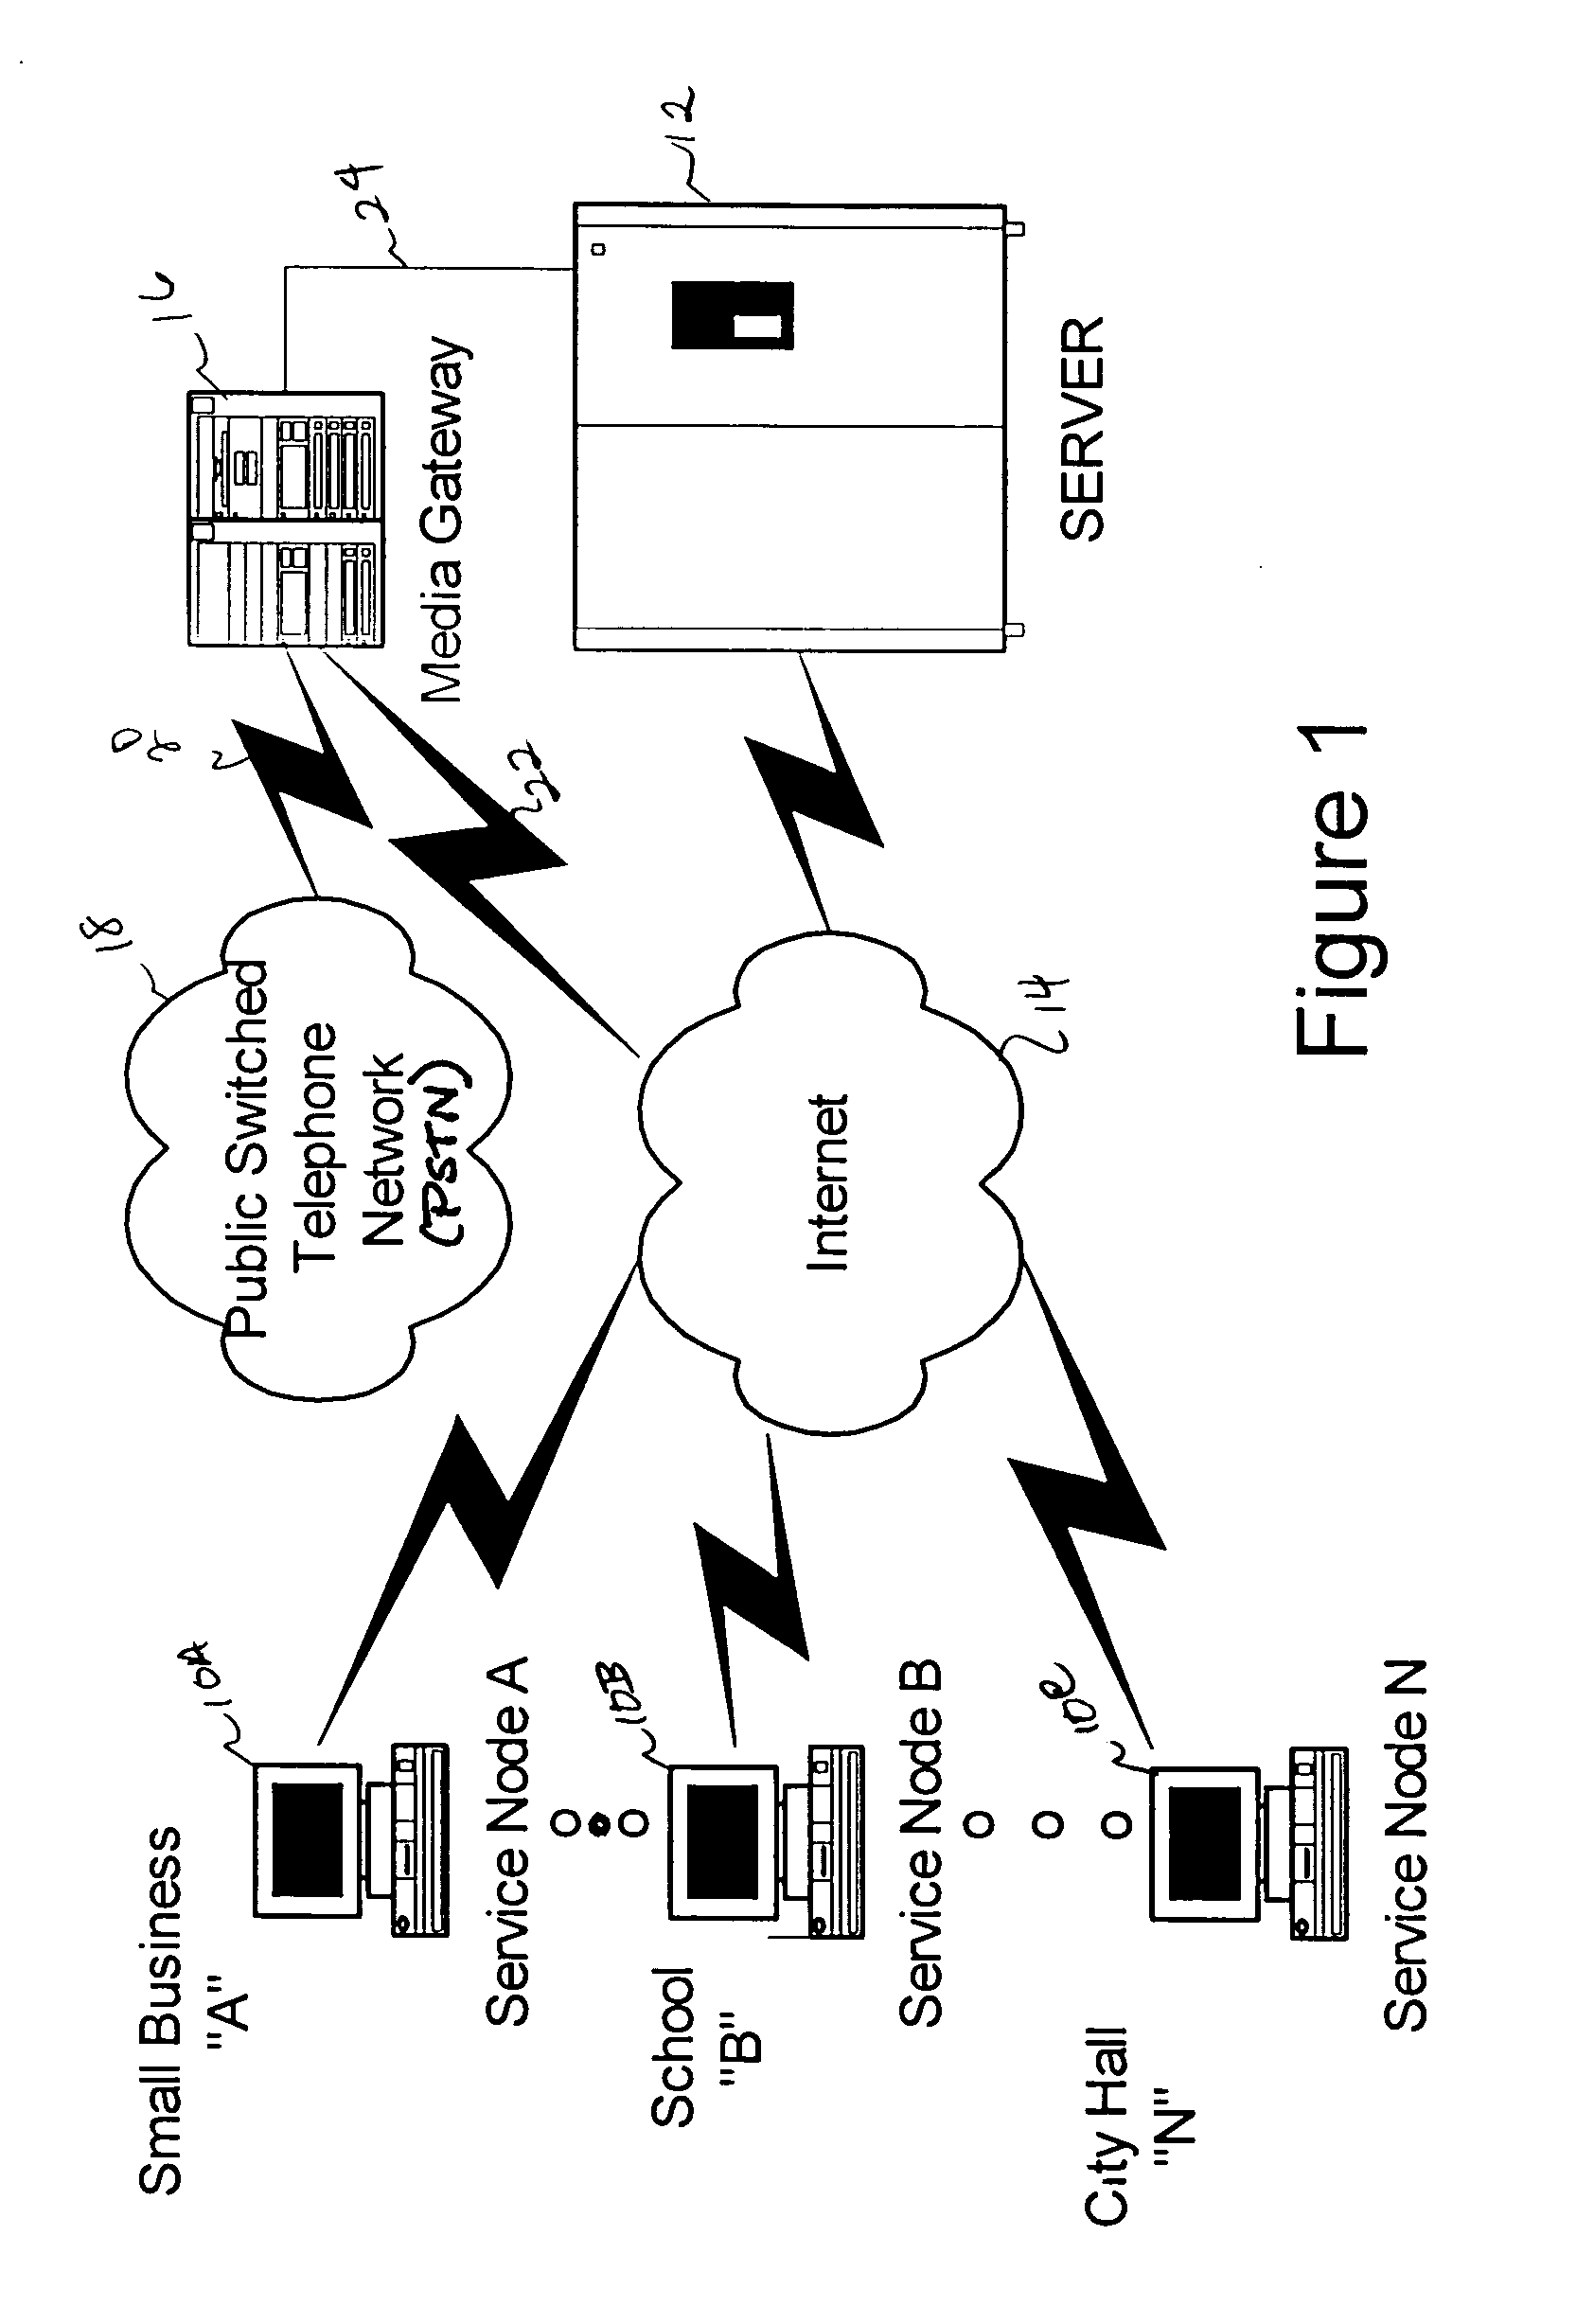 Methods and systems for providing communications services